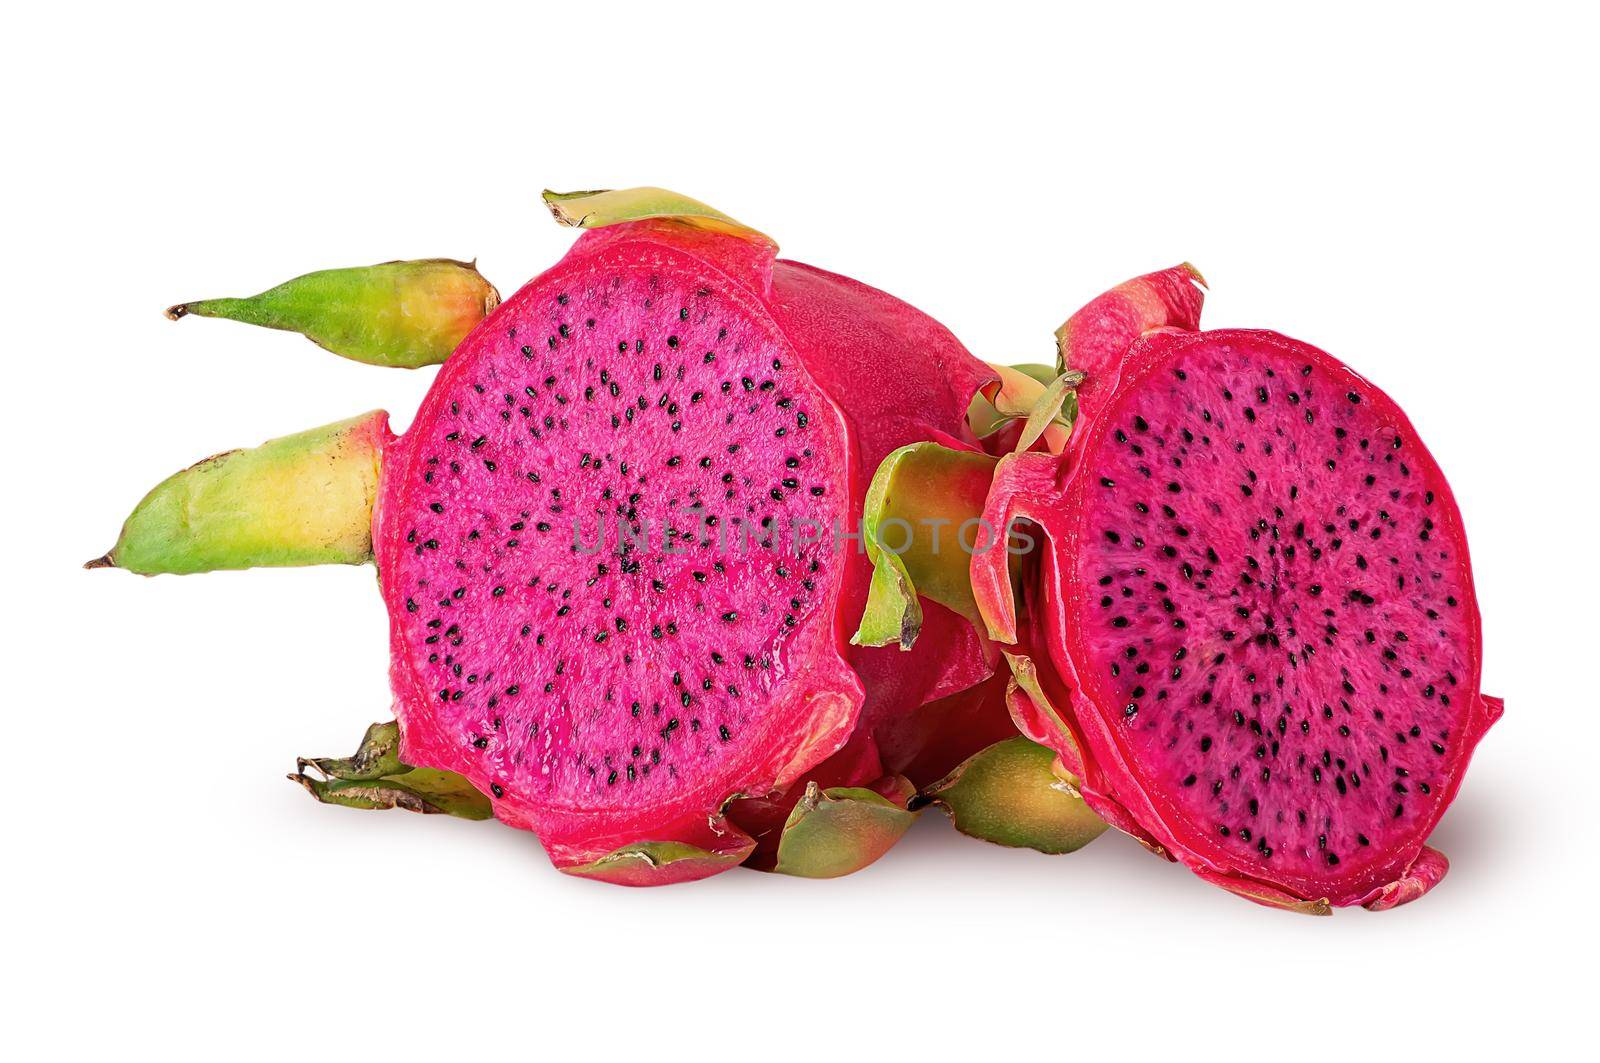 Dragon fruit two halves unfolded isolated on white by Cipariss